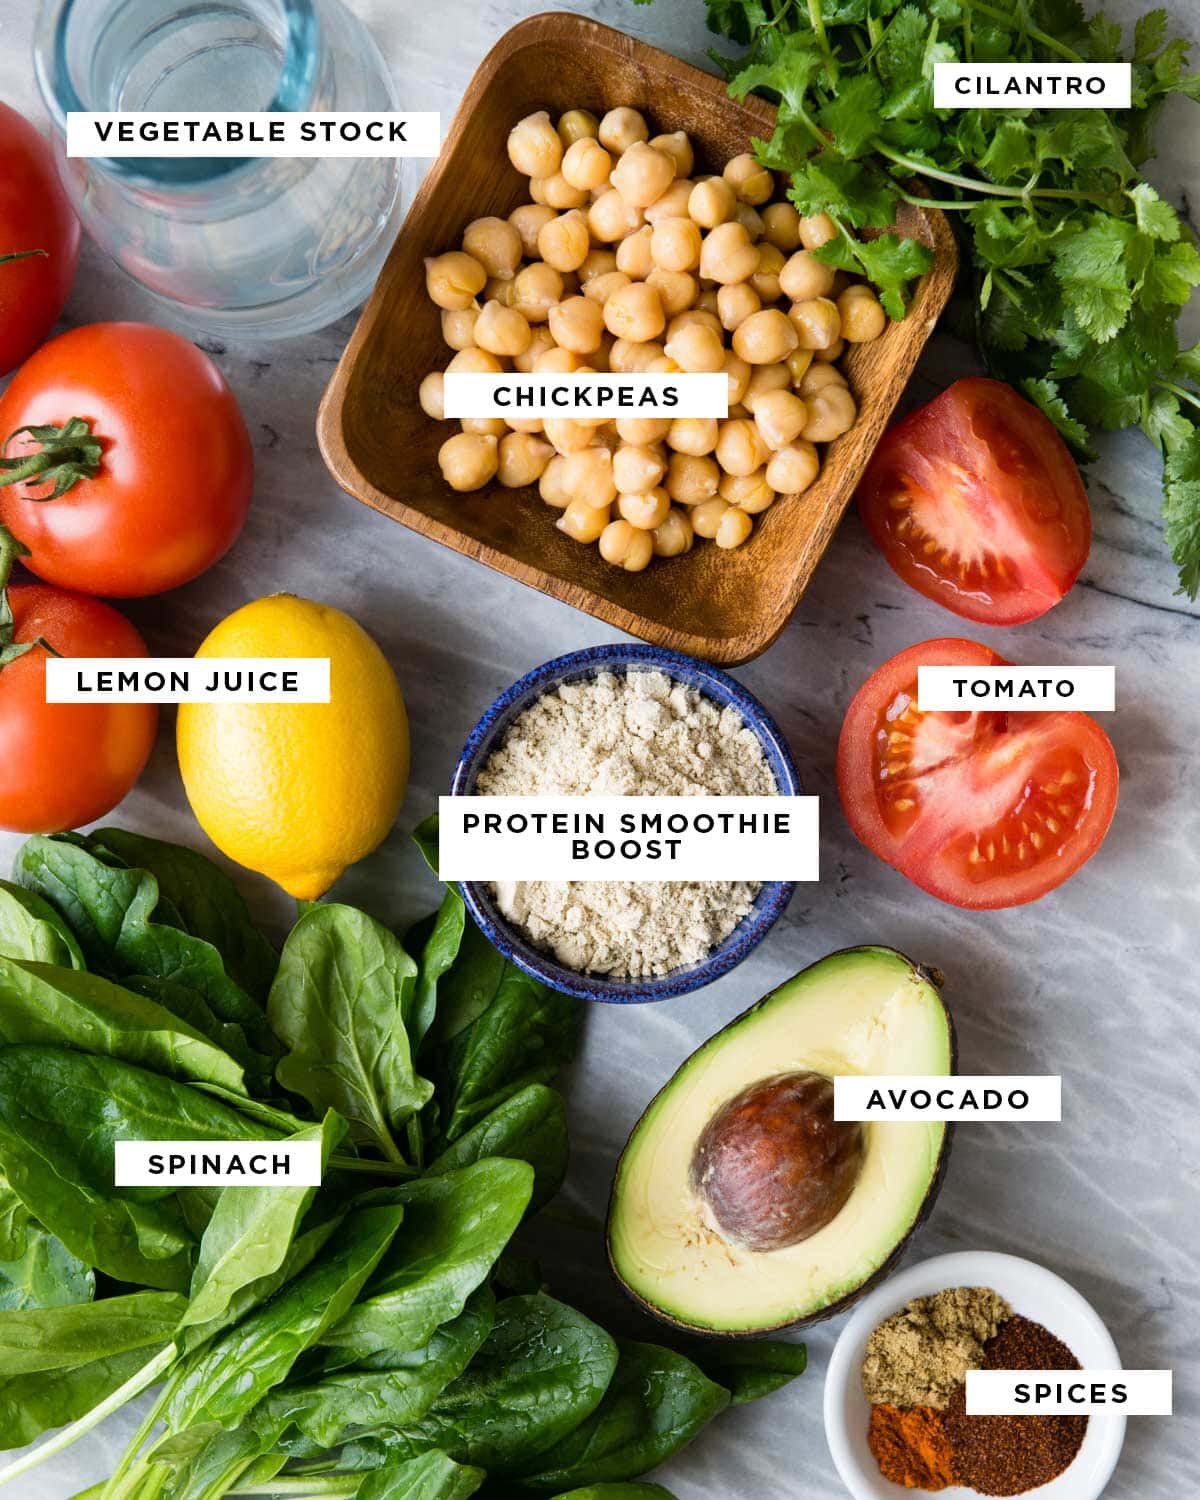 ingredients for a savory smoothie including cilantro, chickpeas, tomato, homemade protein powder, avocado, spices, spinach, lemon juice and vegetable stock.